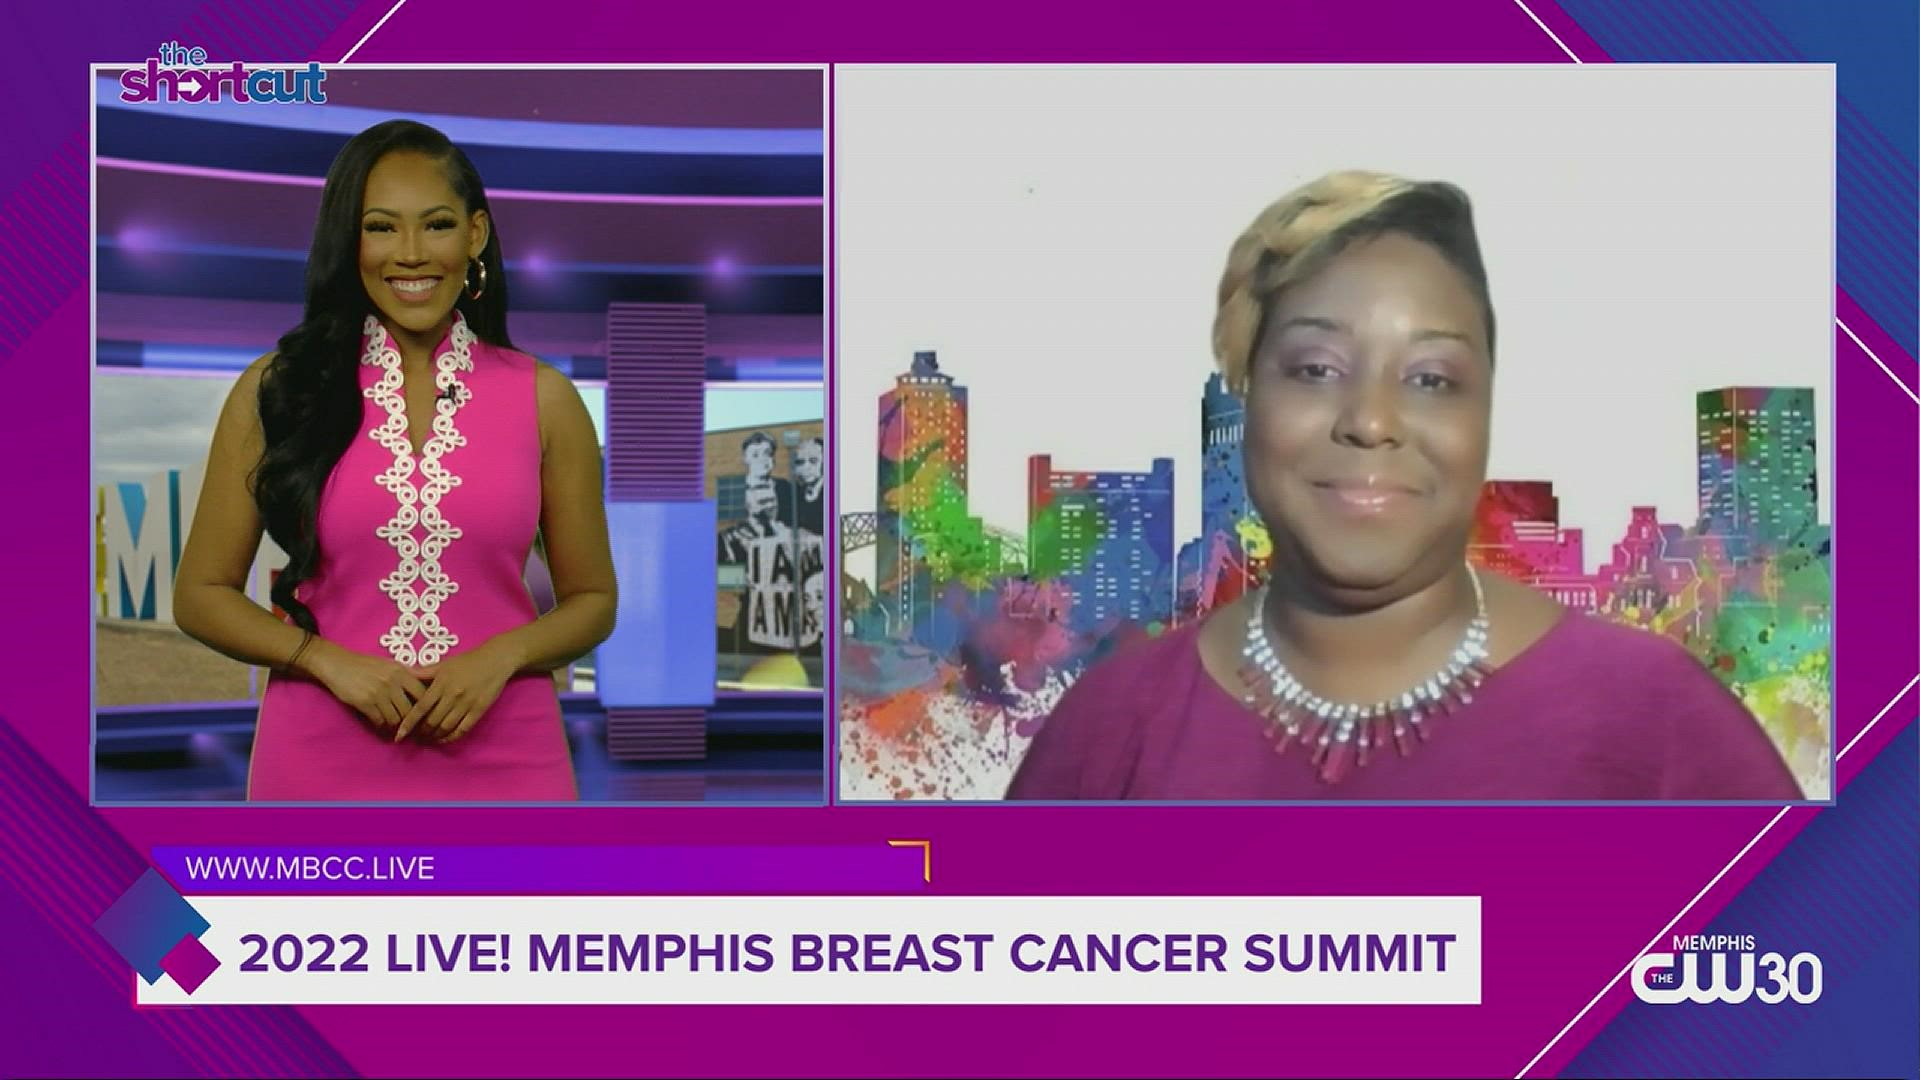 From breast caner myth-busting sessions to mammogram services, beat breast cancer by attending the free, family-friendly 2022 Live! Memphis Breast Cancer Summit!